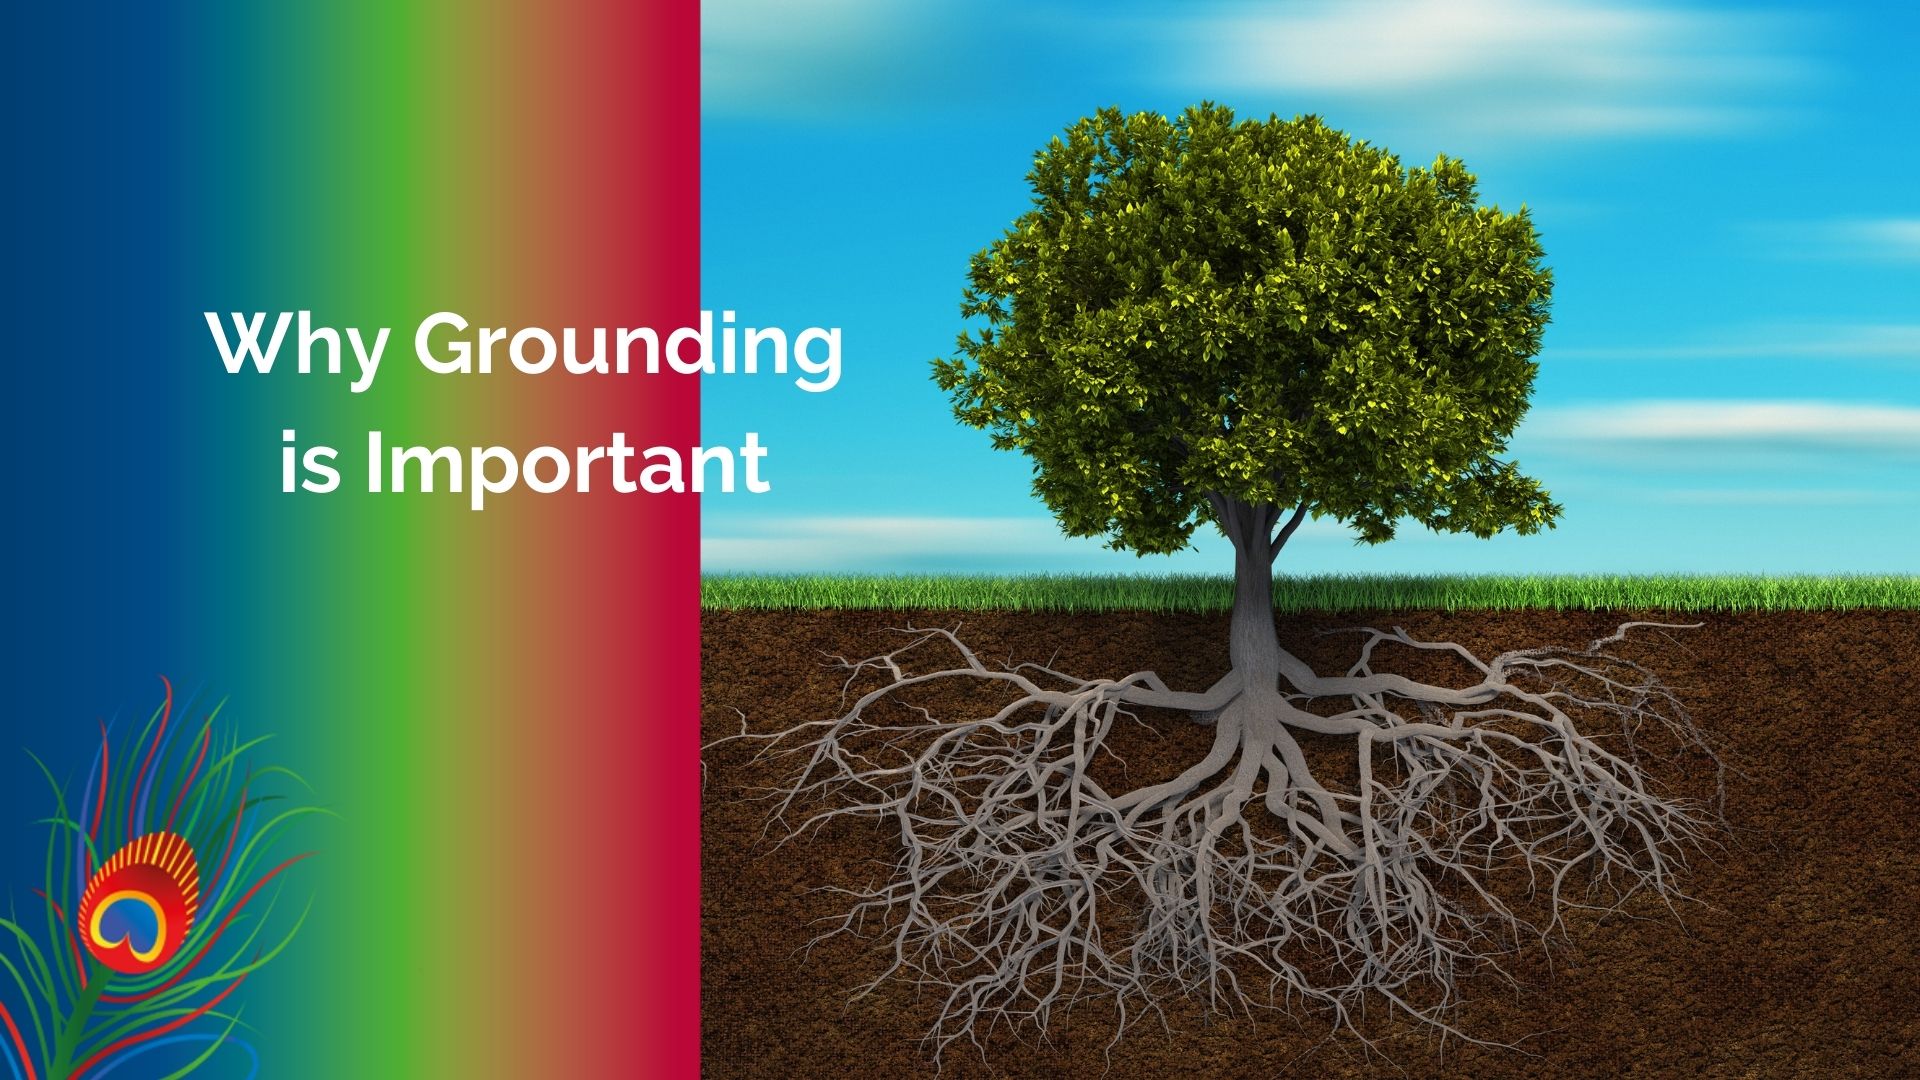 Why Grounding is Important